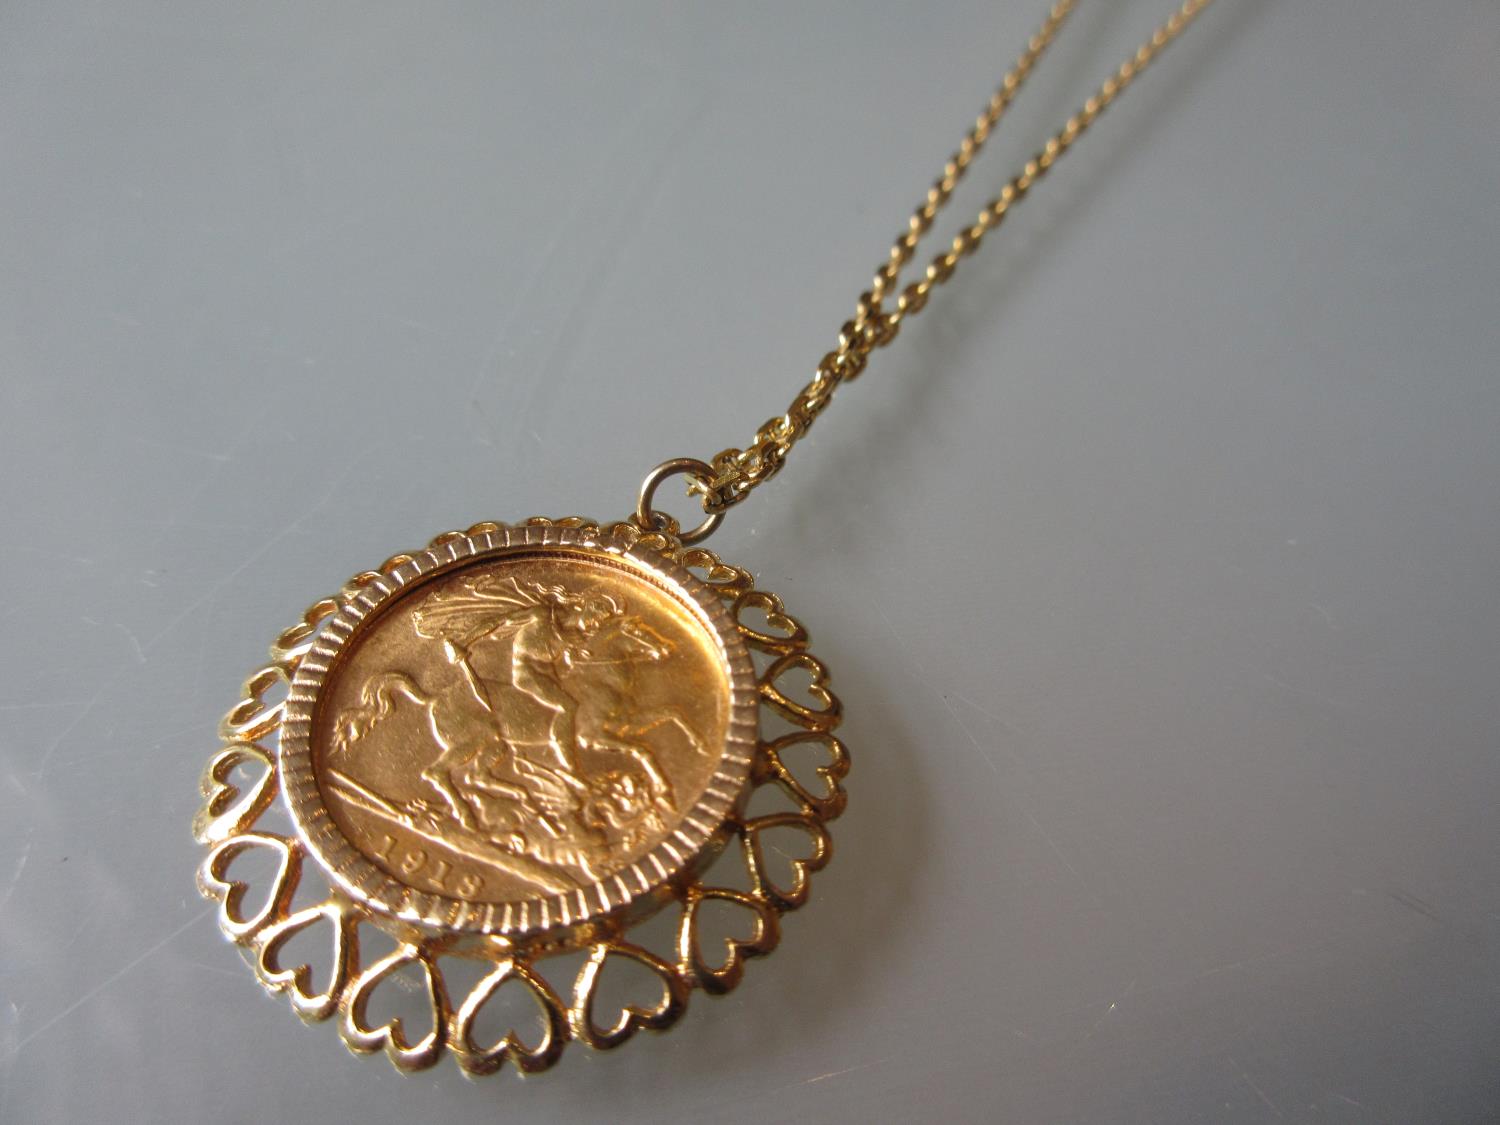 1913 Half sovereign in a 9ct gold mount with chain